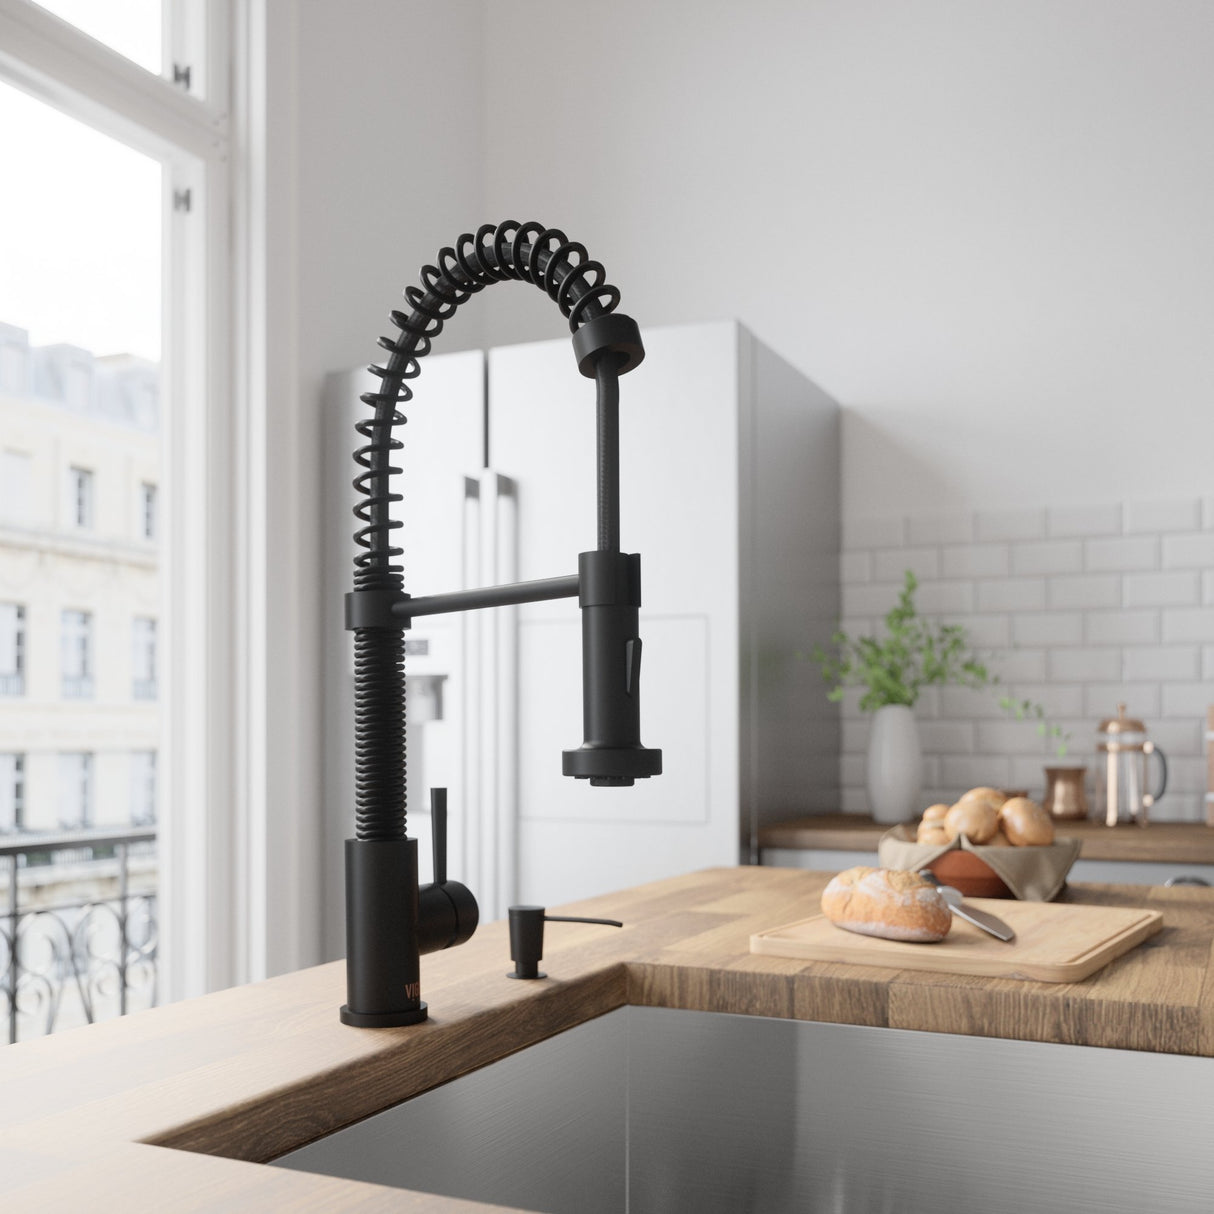 VIGO VG02001MBK2 19" H Edison Single-Handle with Pull-Down Sprayer Kitchen Faucet with Soap Dispenser in Matte Black